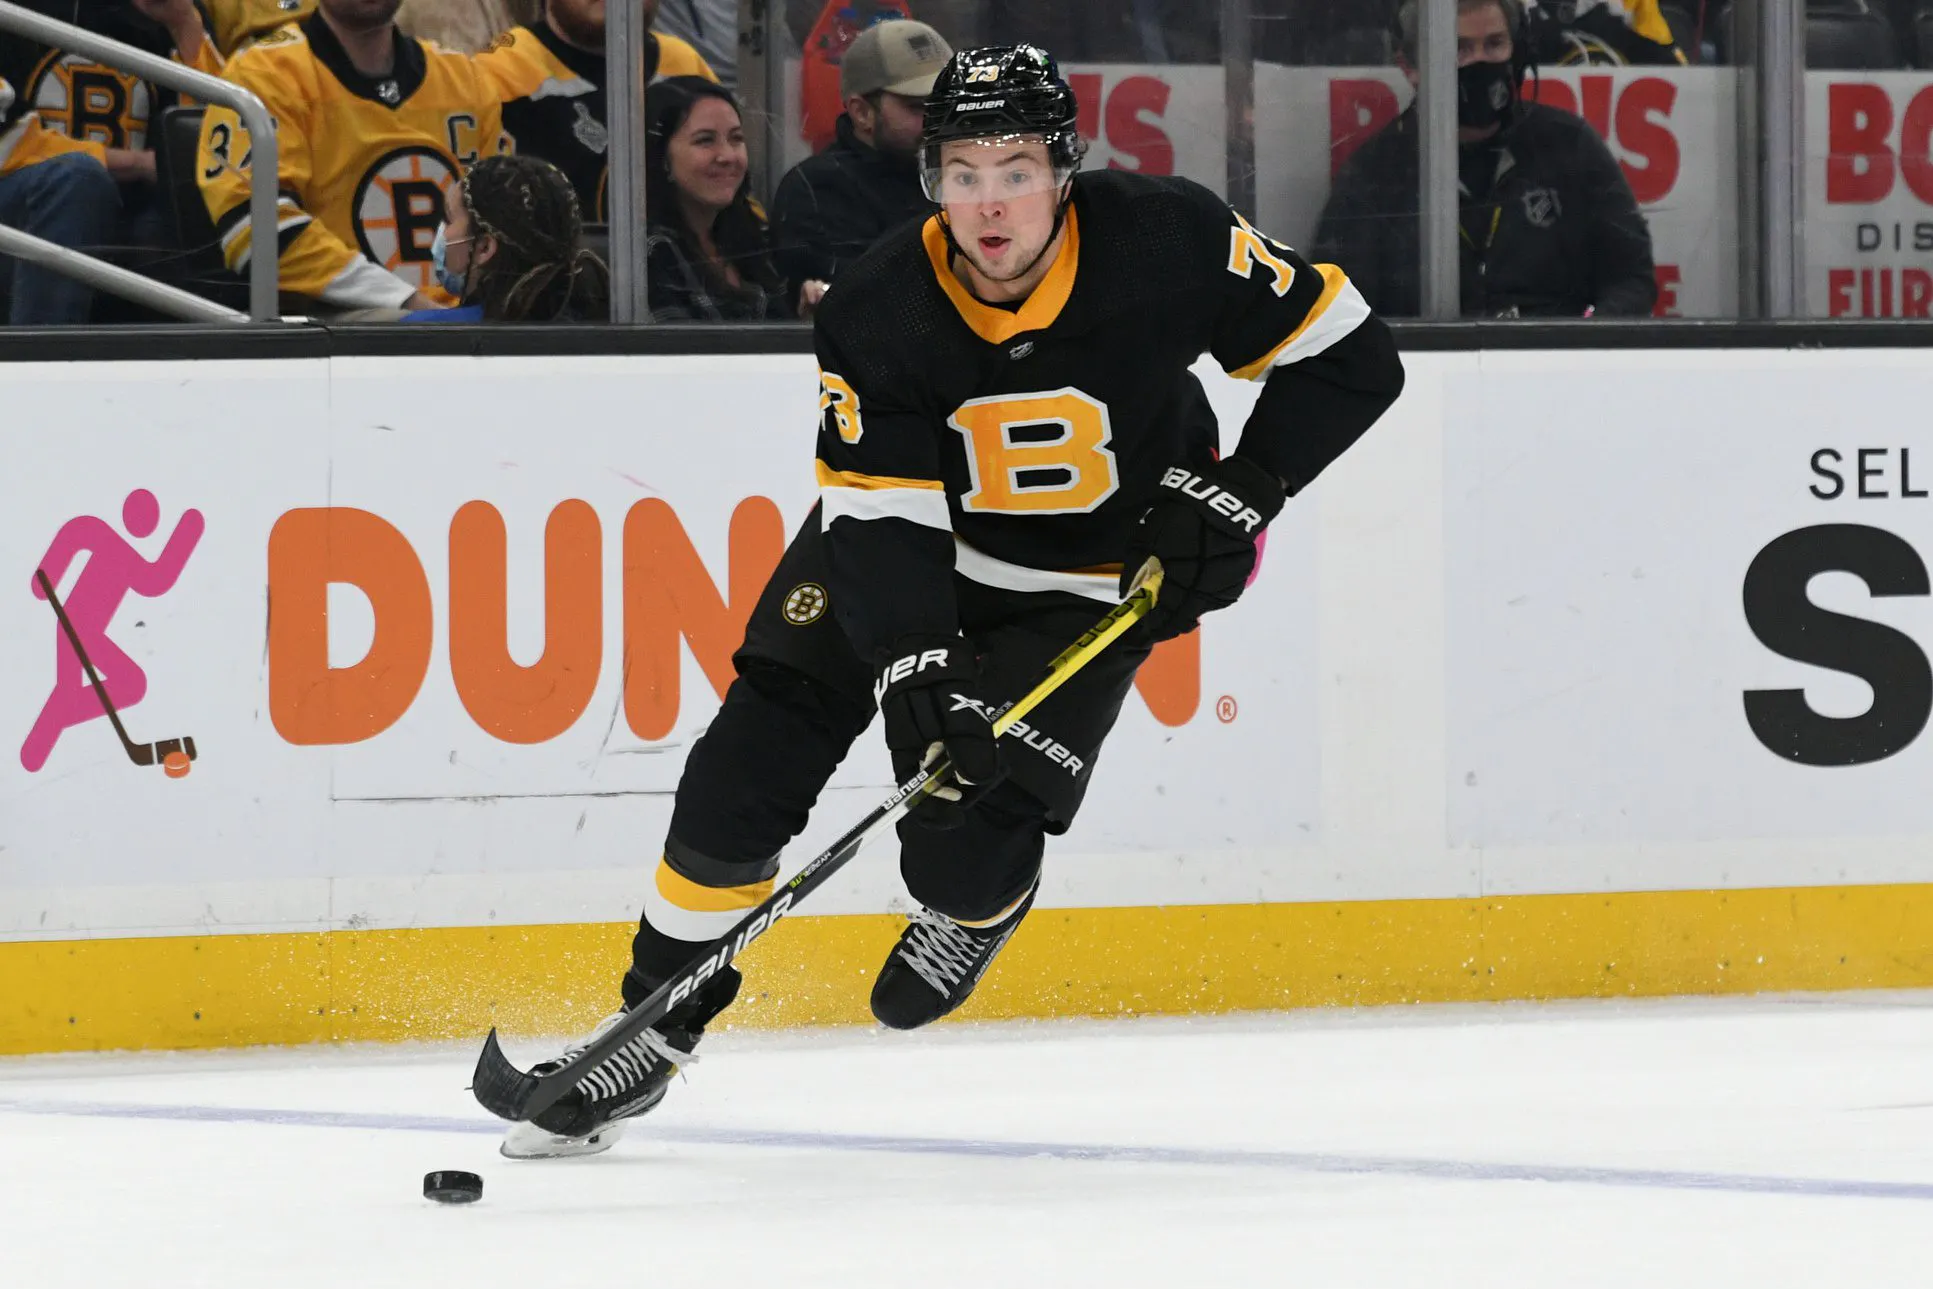 Bruins defenceman Charlie McAvoy expected to miss six months after undergoing shoulder surgery